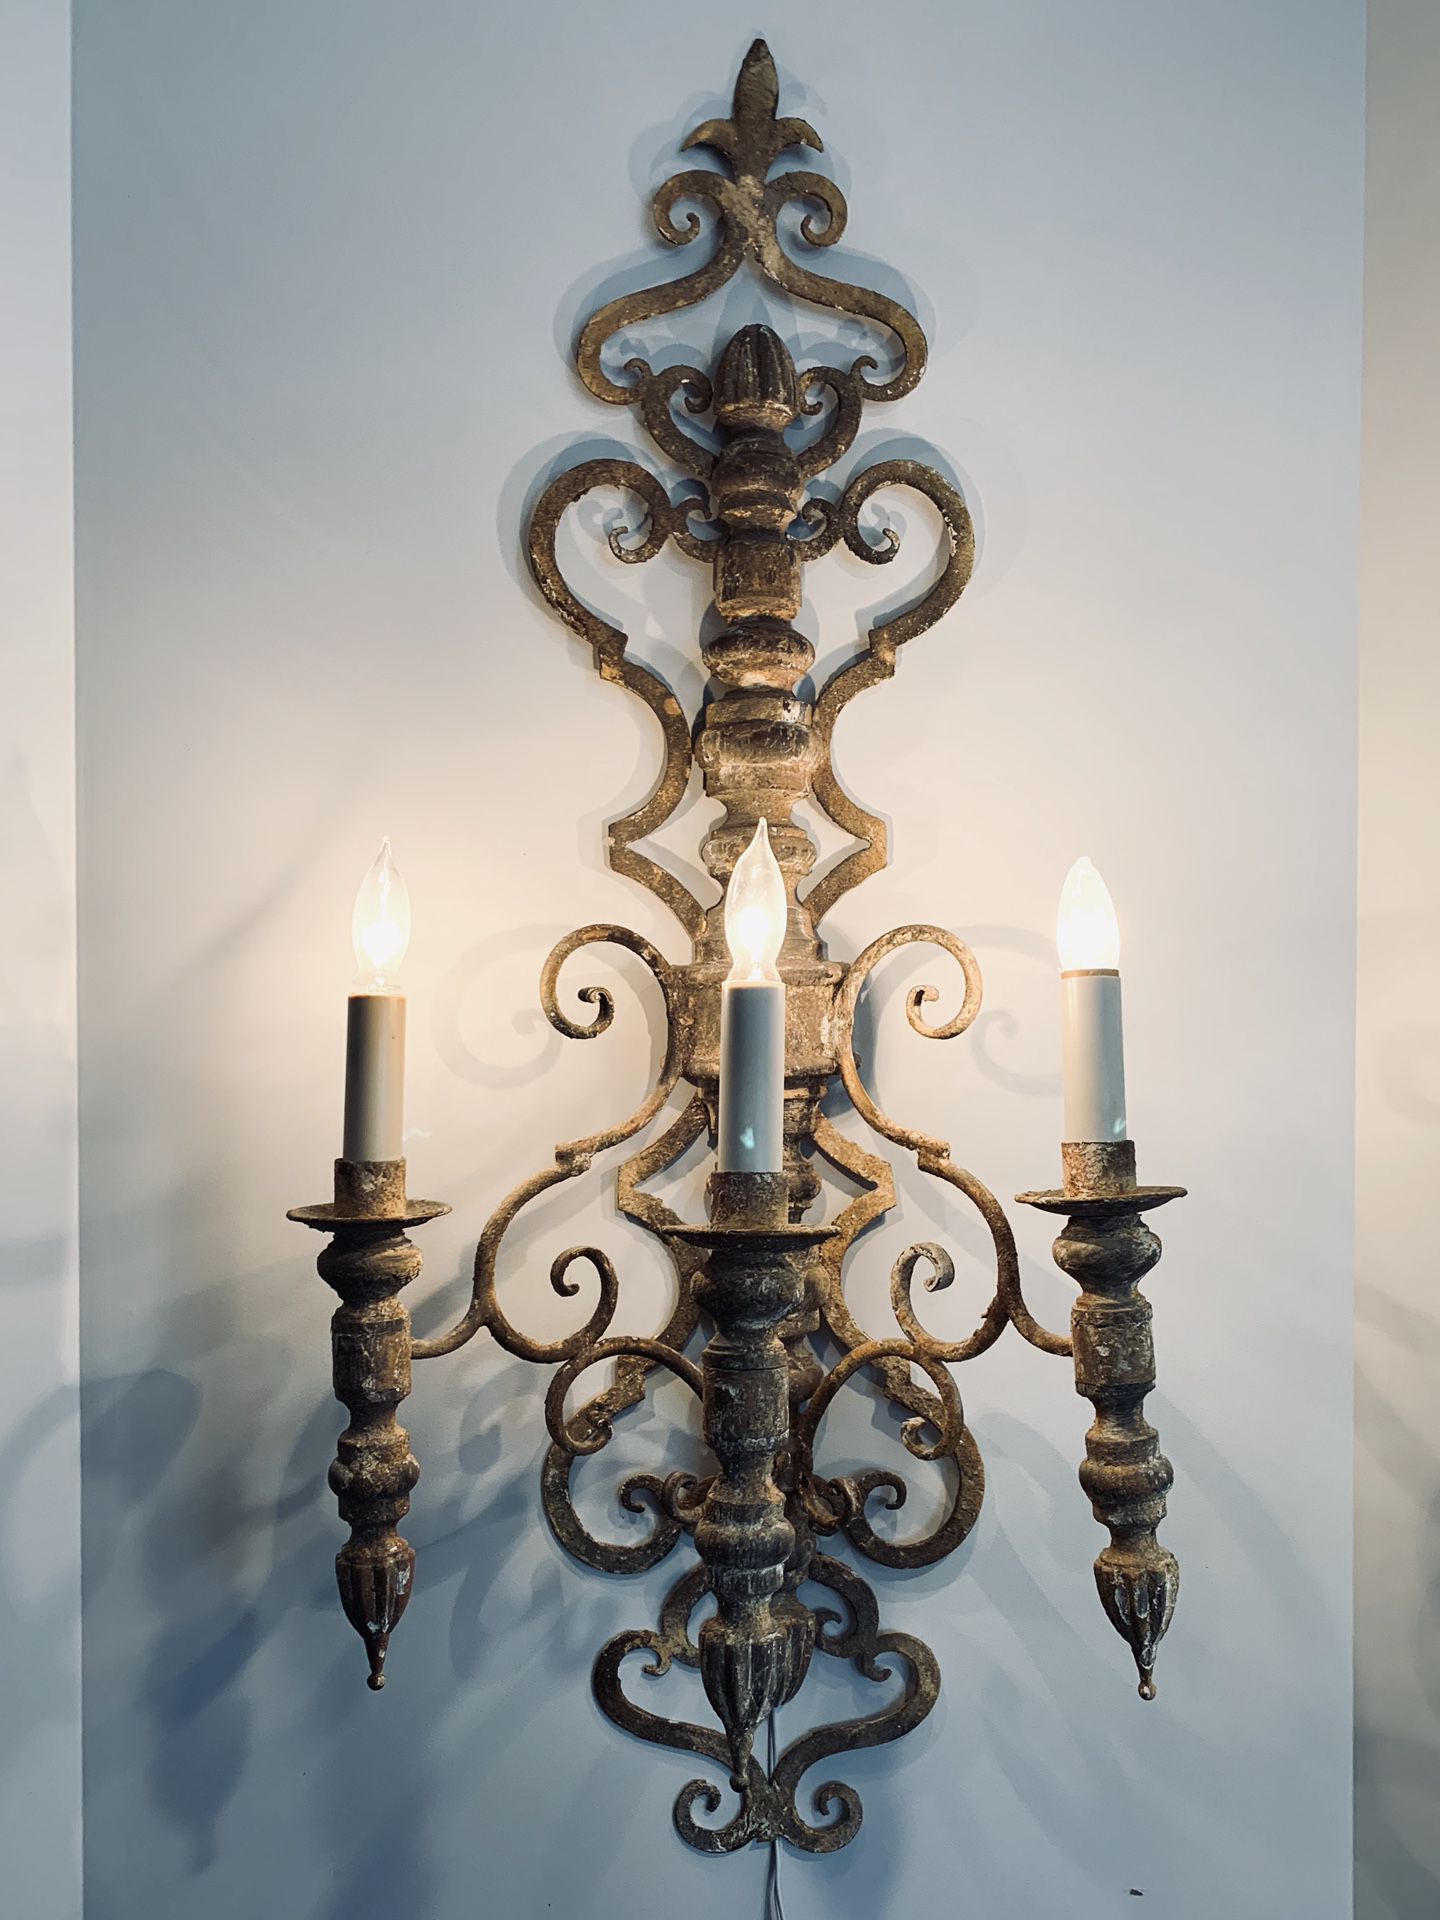 Antique wall sconce